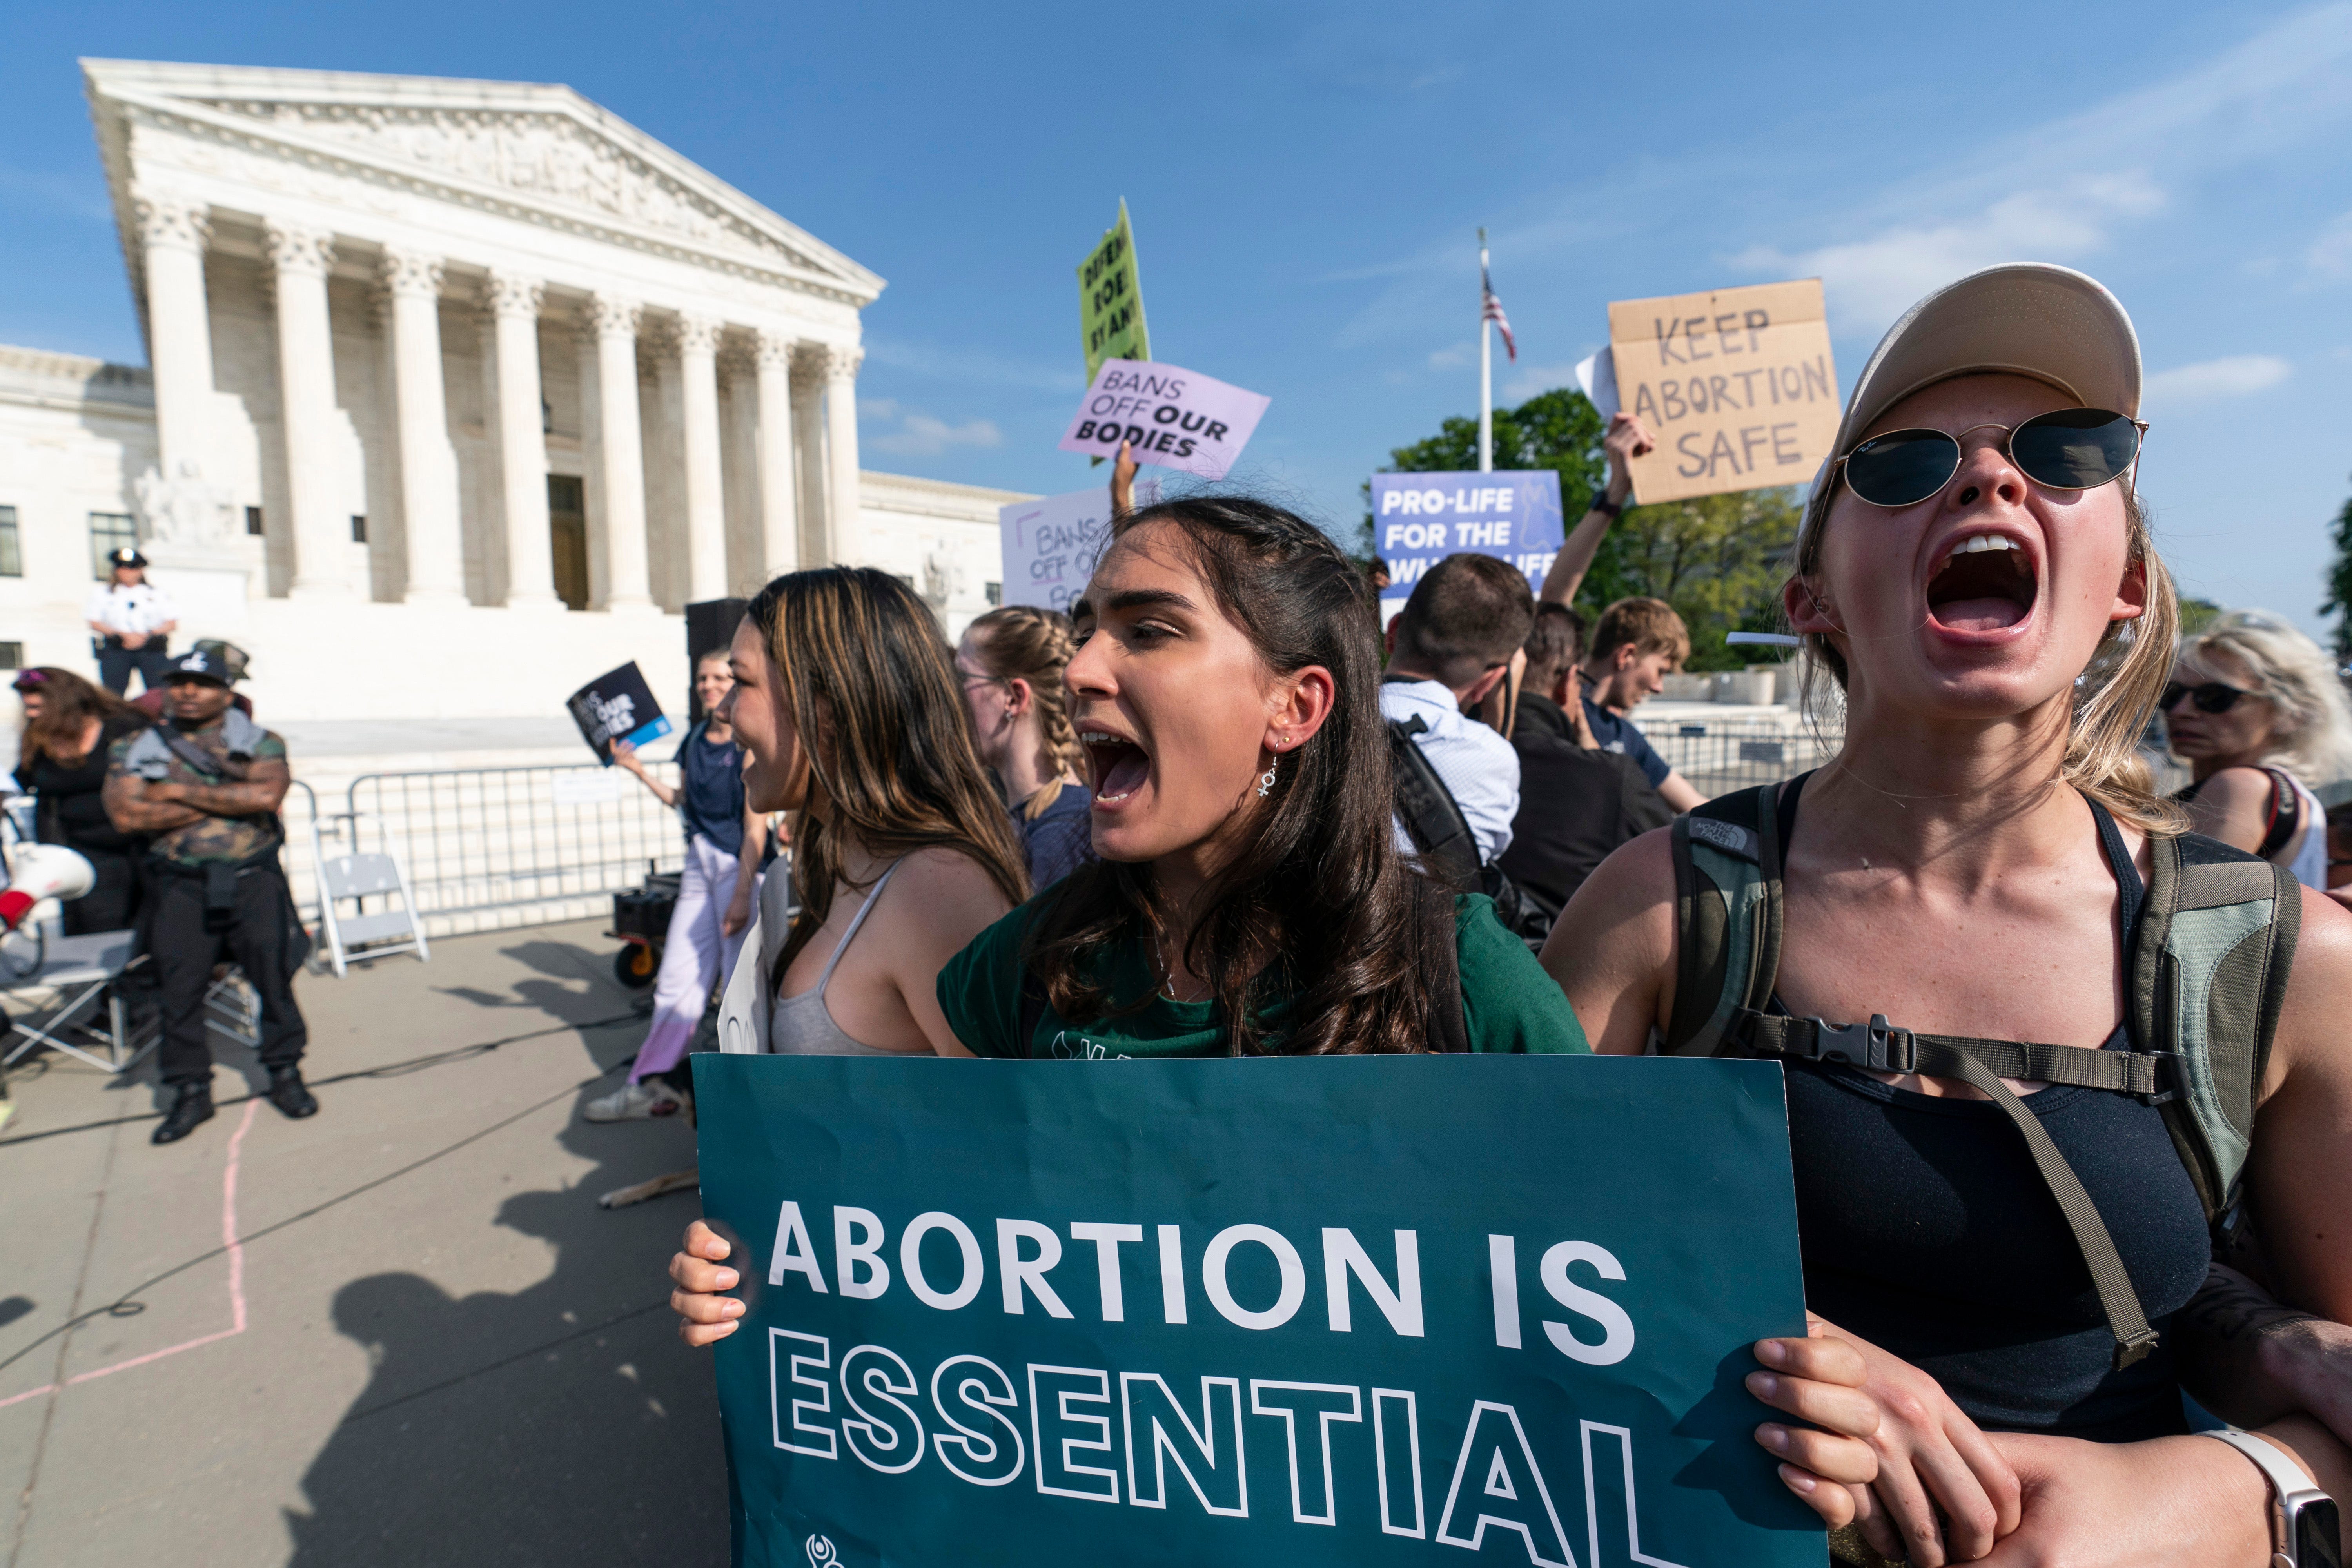 SCOTUS verifies leaked opinion in abortion case, Amber Heard to testify: 5 Things podcast